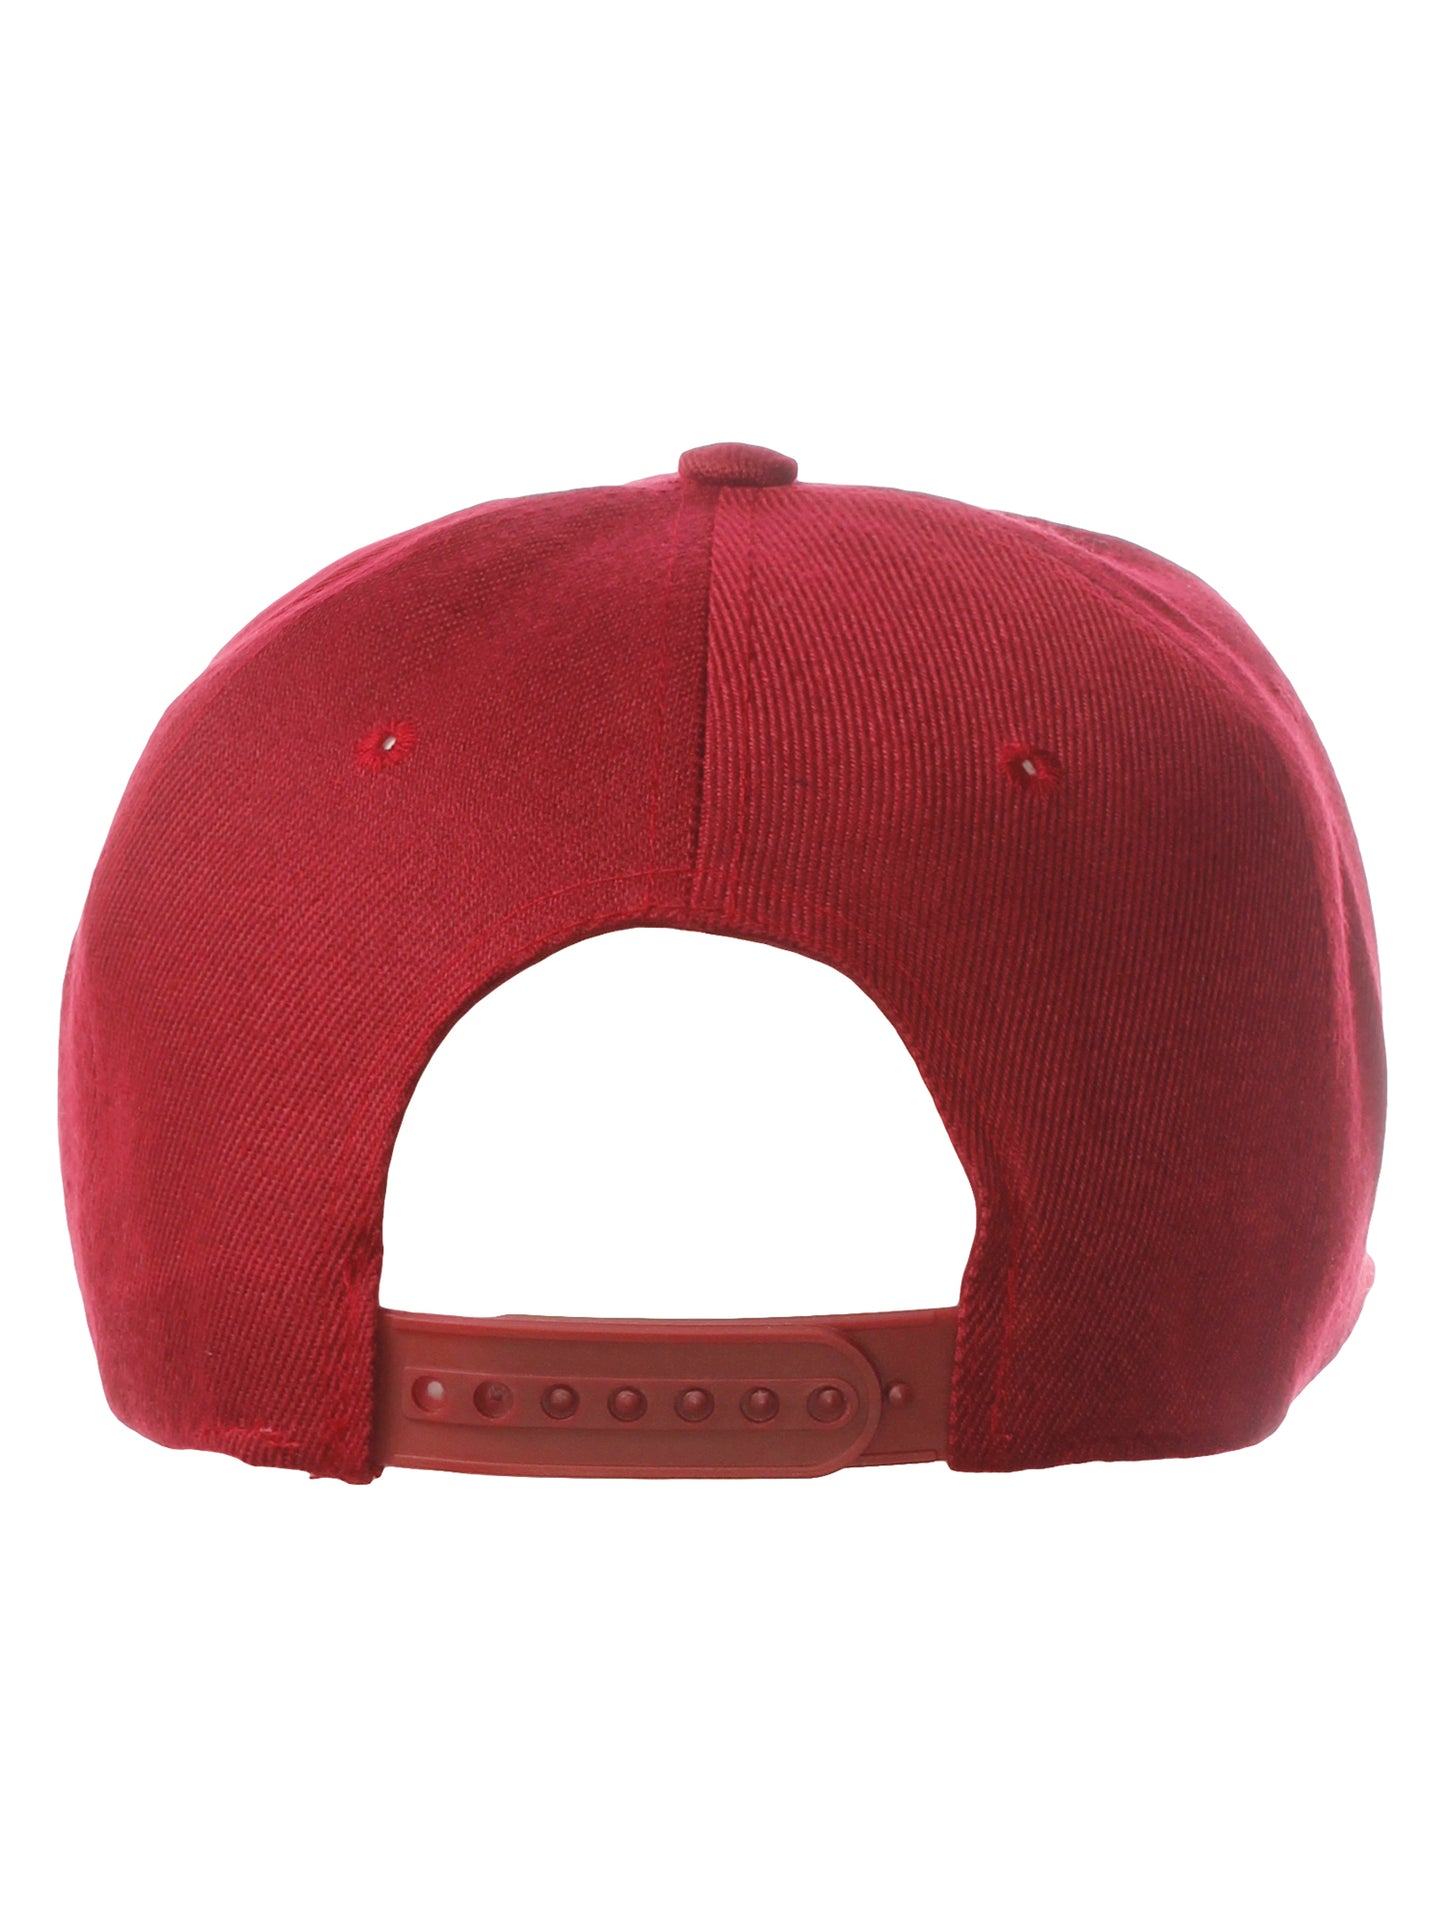 Classic Snapback Hat Custom A to Z Initial Letters, Burgundy Cap White Black